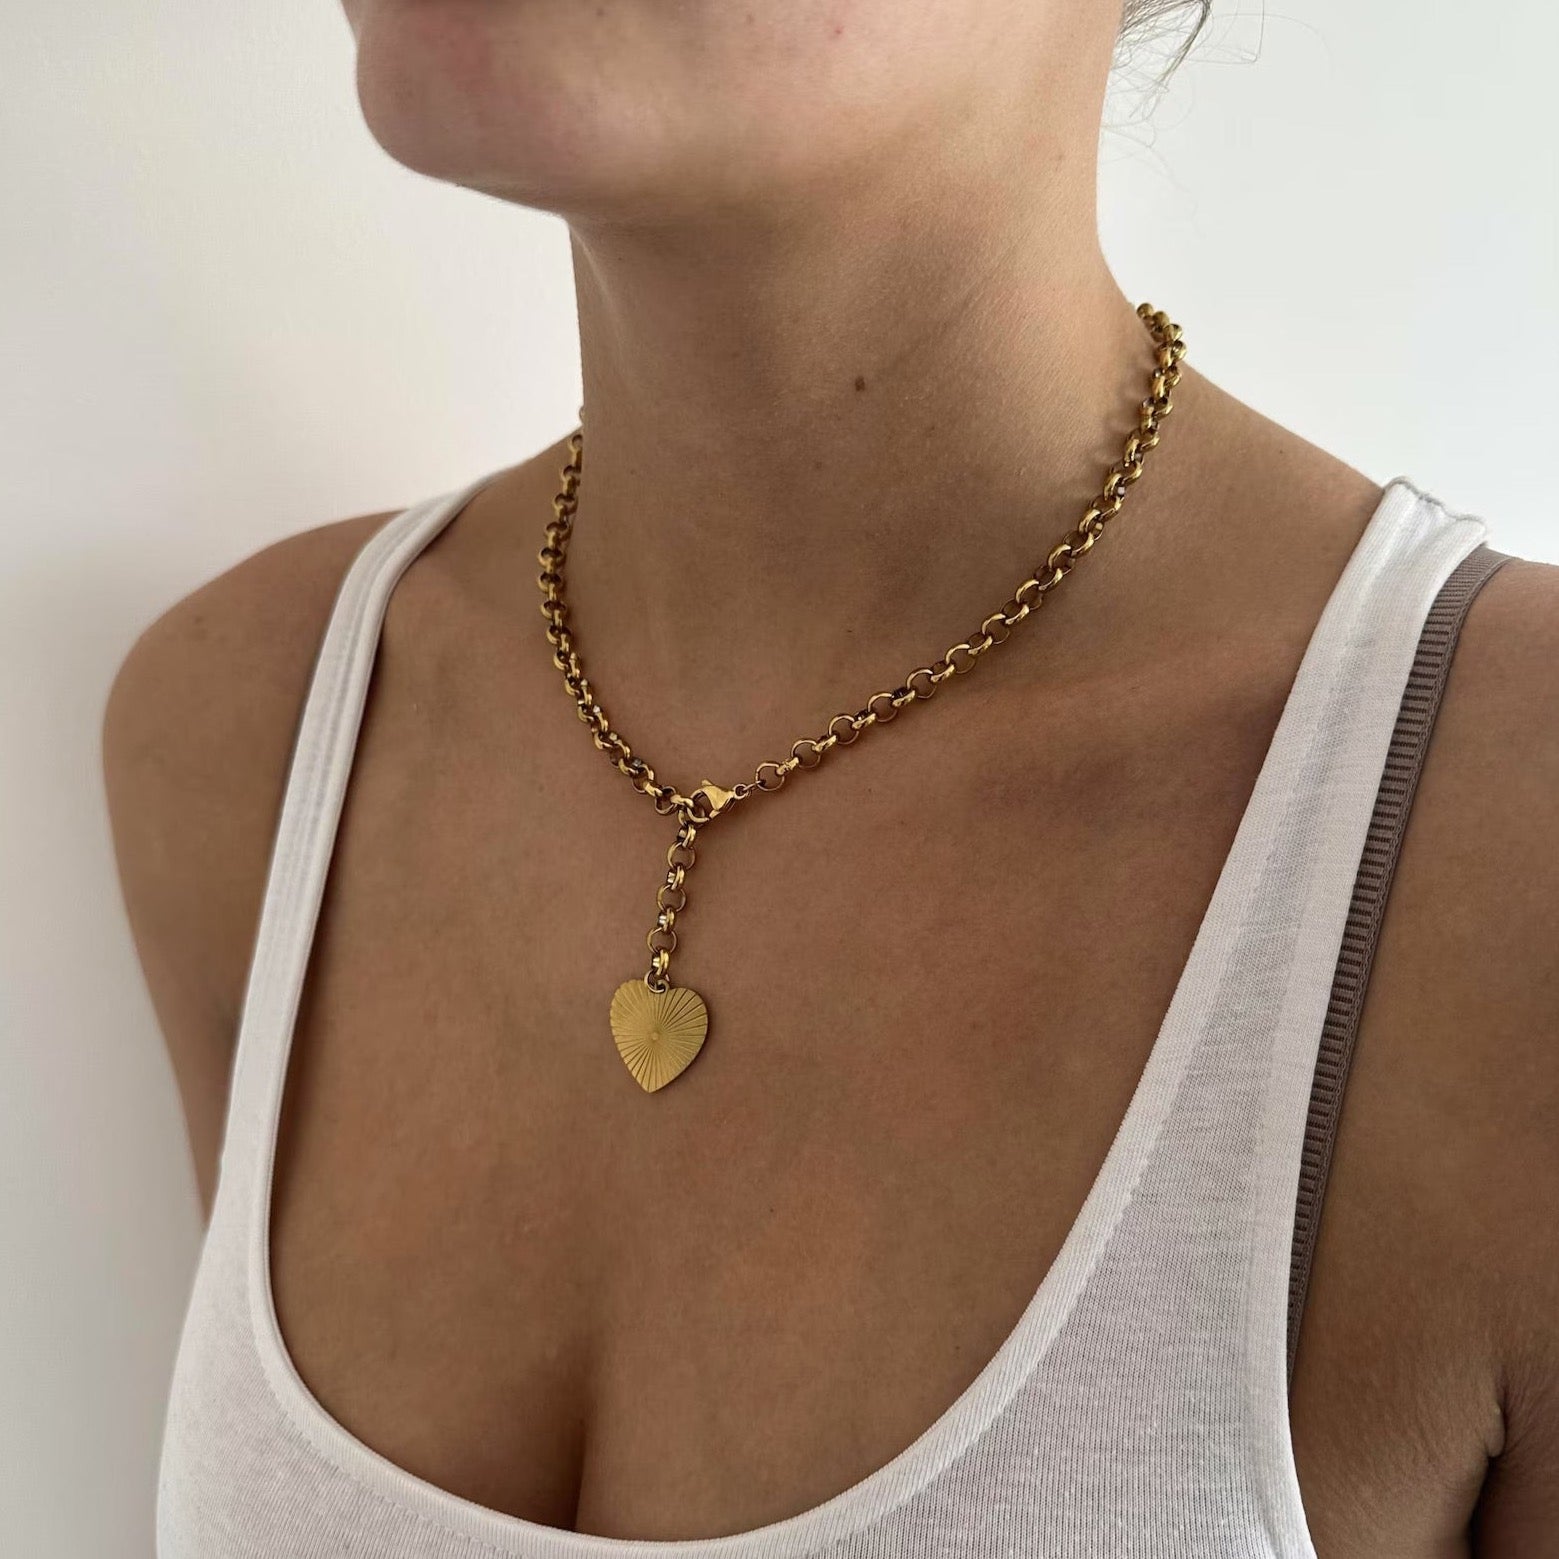 Gleaming golden heart necklace making a statement